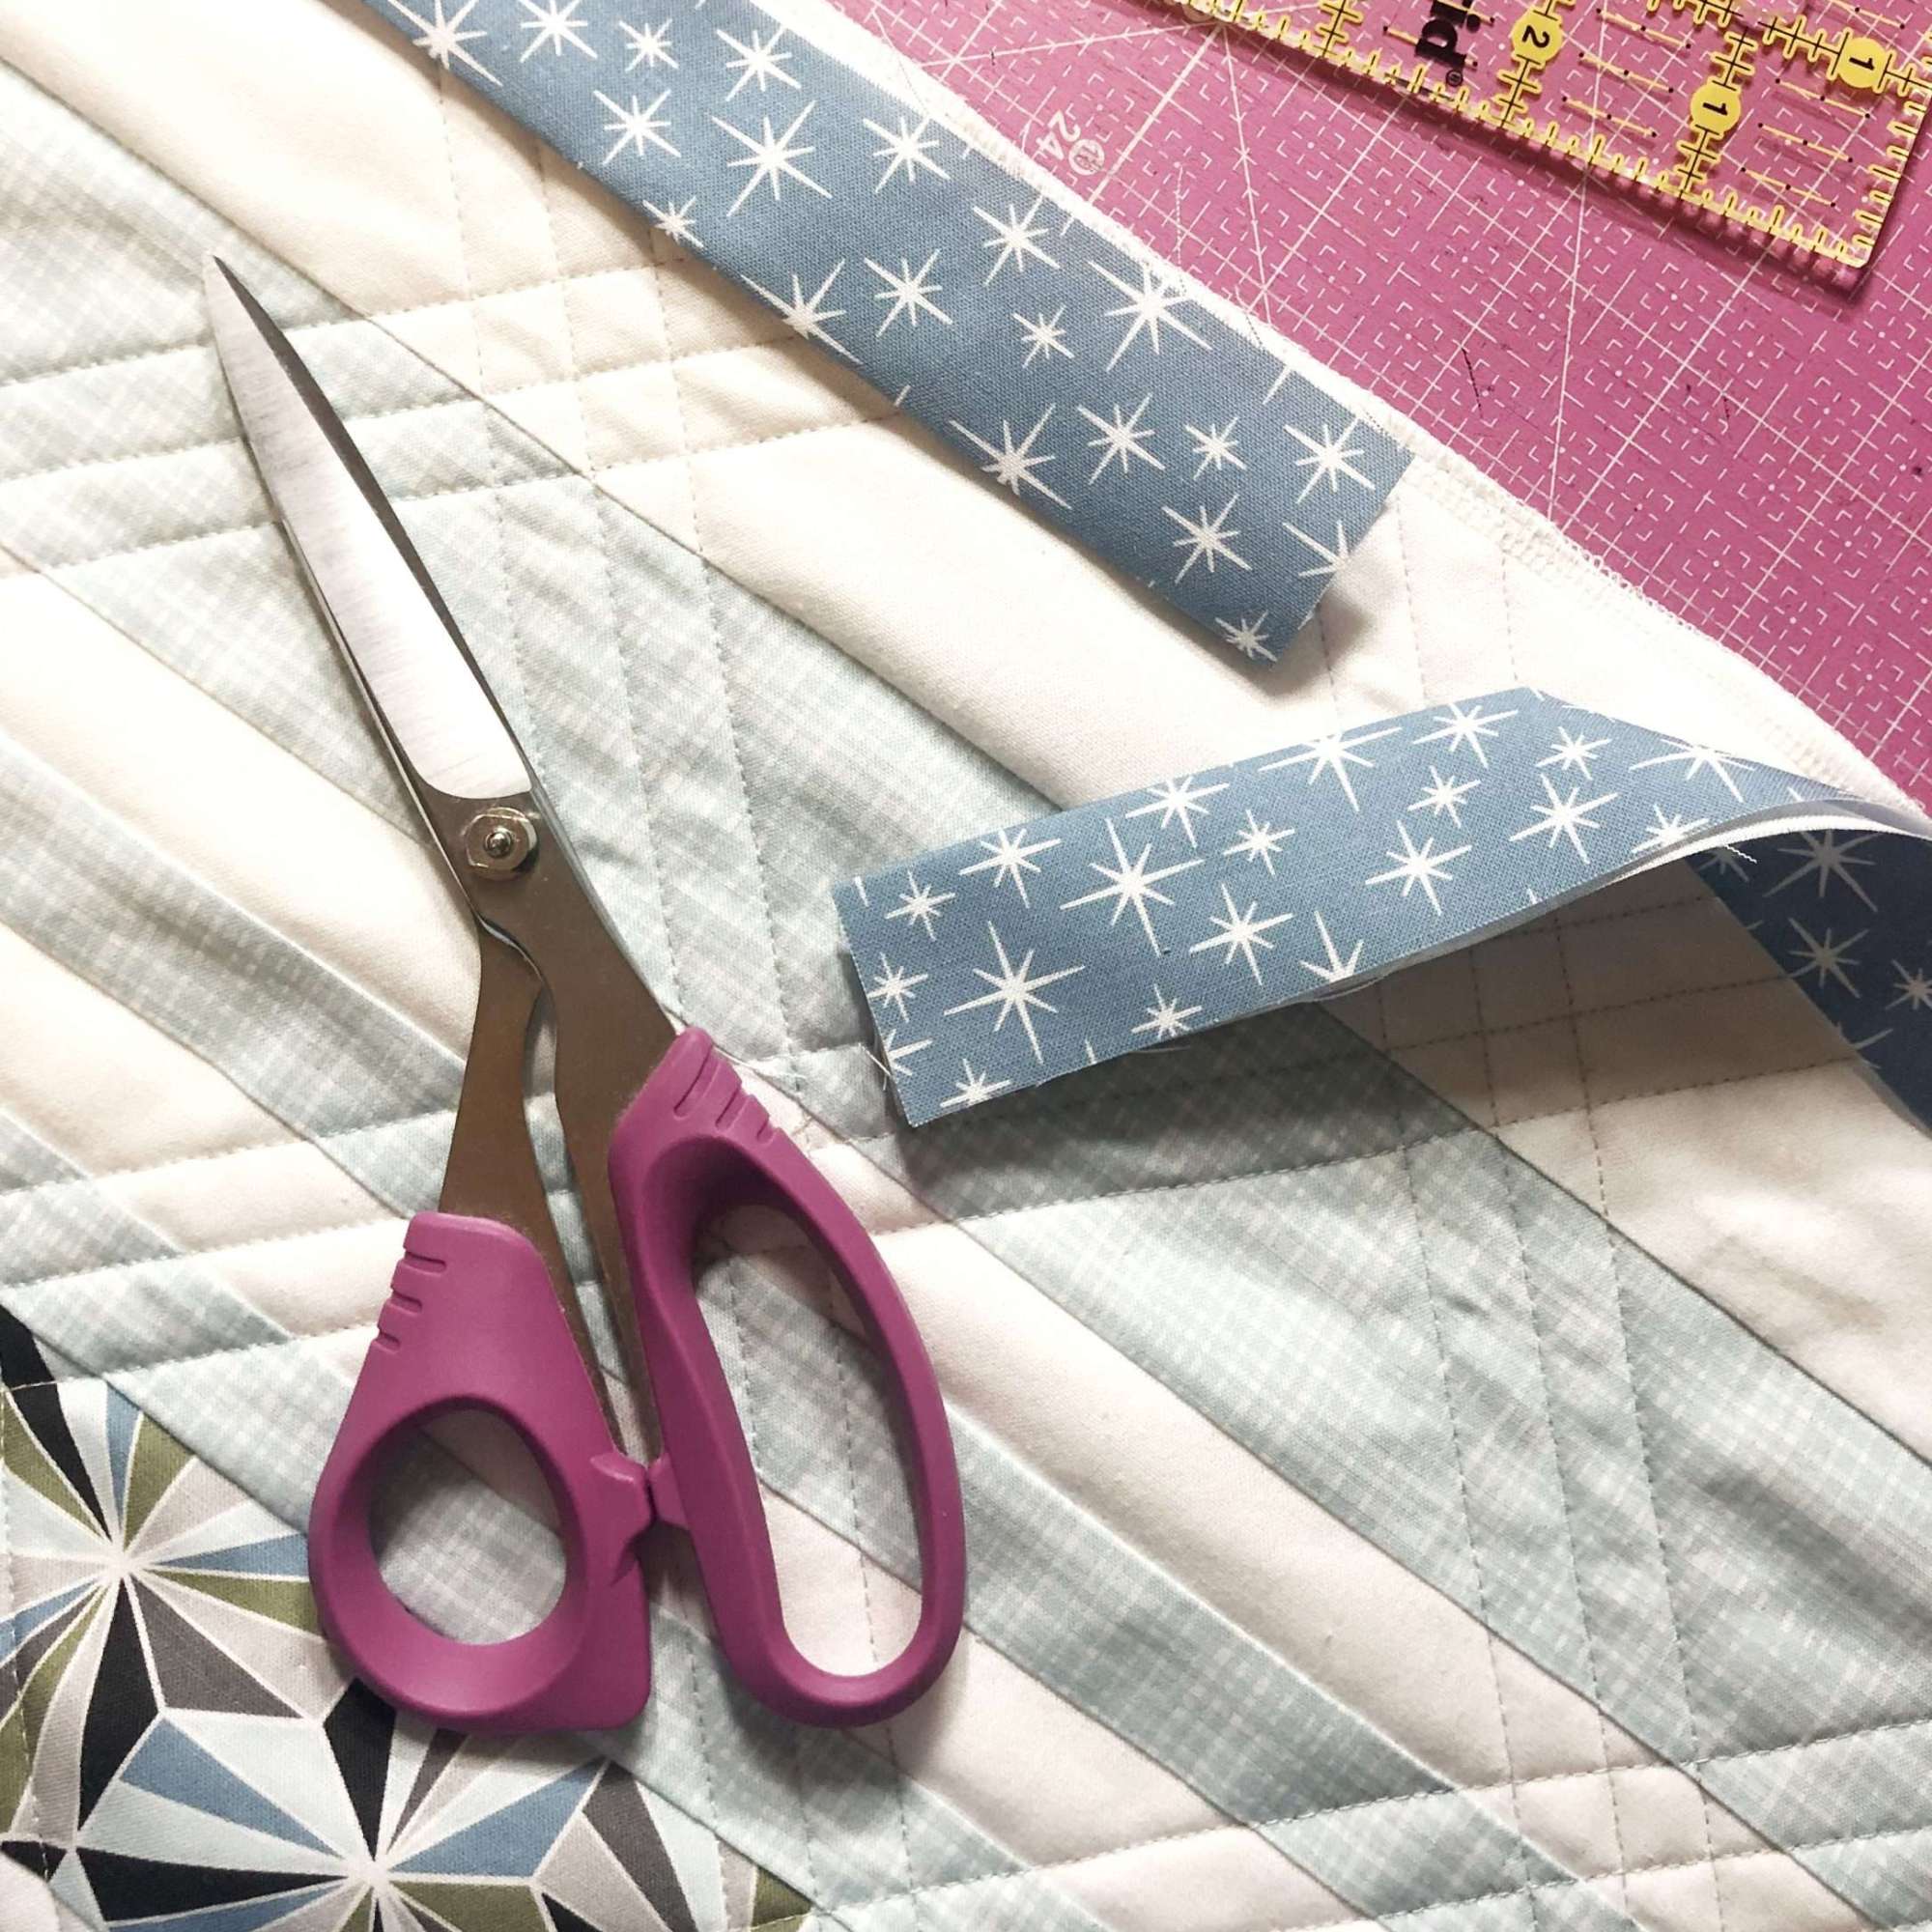 Joining the Ends of your quilt binding